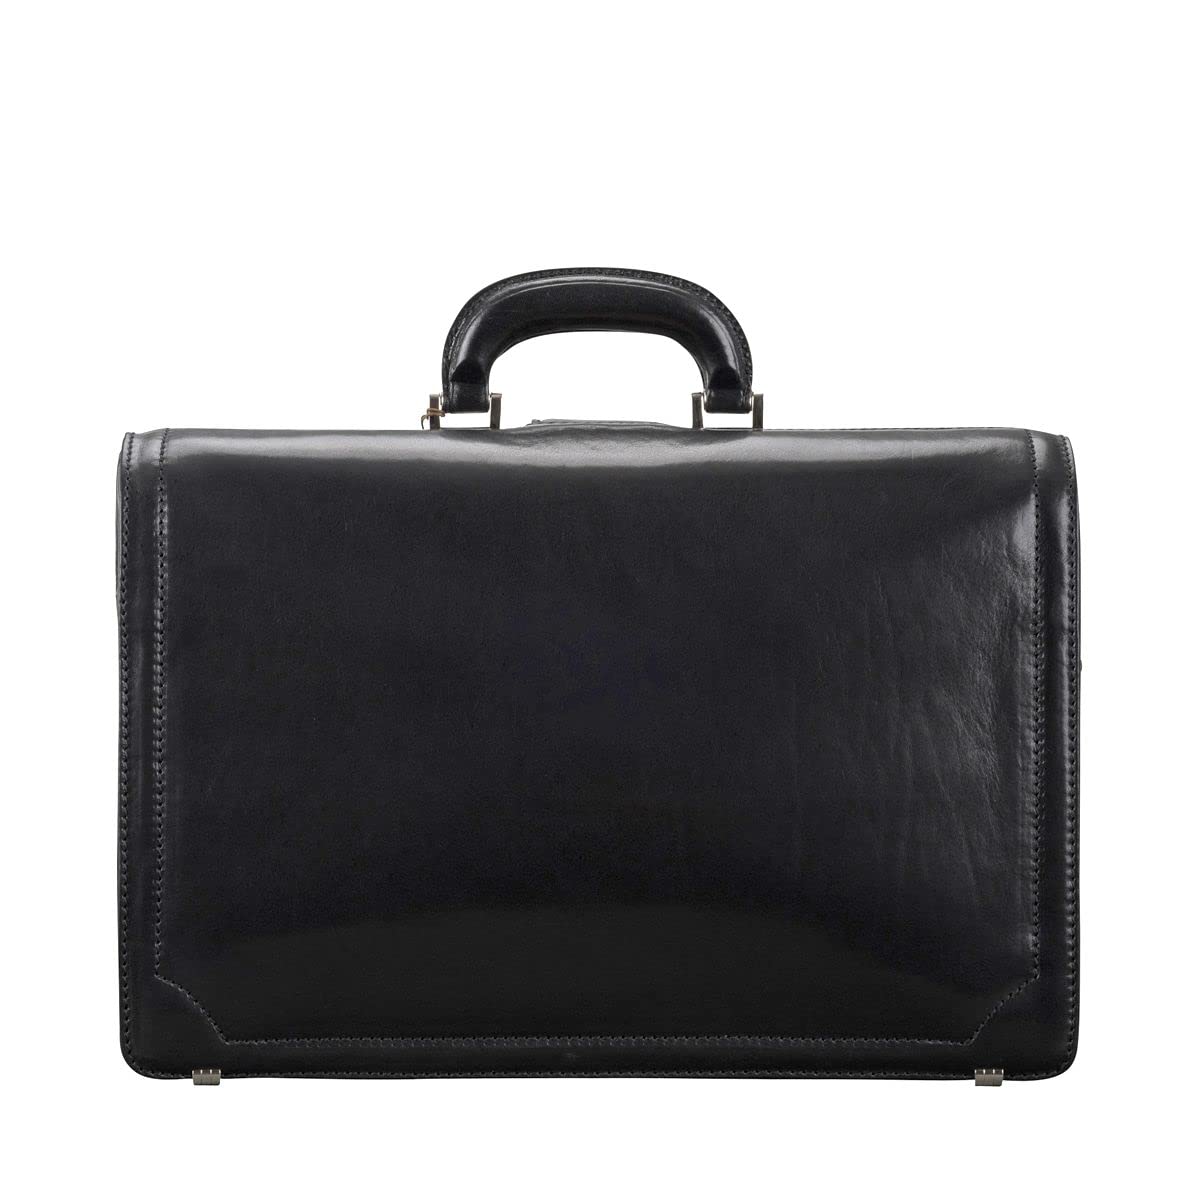 Maxwell Scott - Mens Luxury Leather Executive Lawyer Briefcase - 2 Section Top Handle - Handmade in Italy - The Basilio